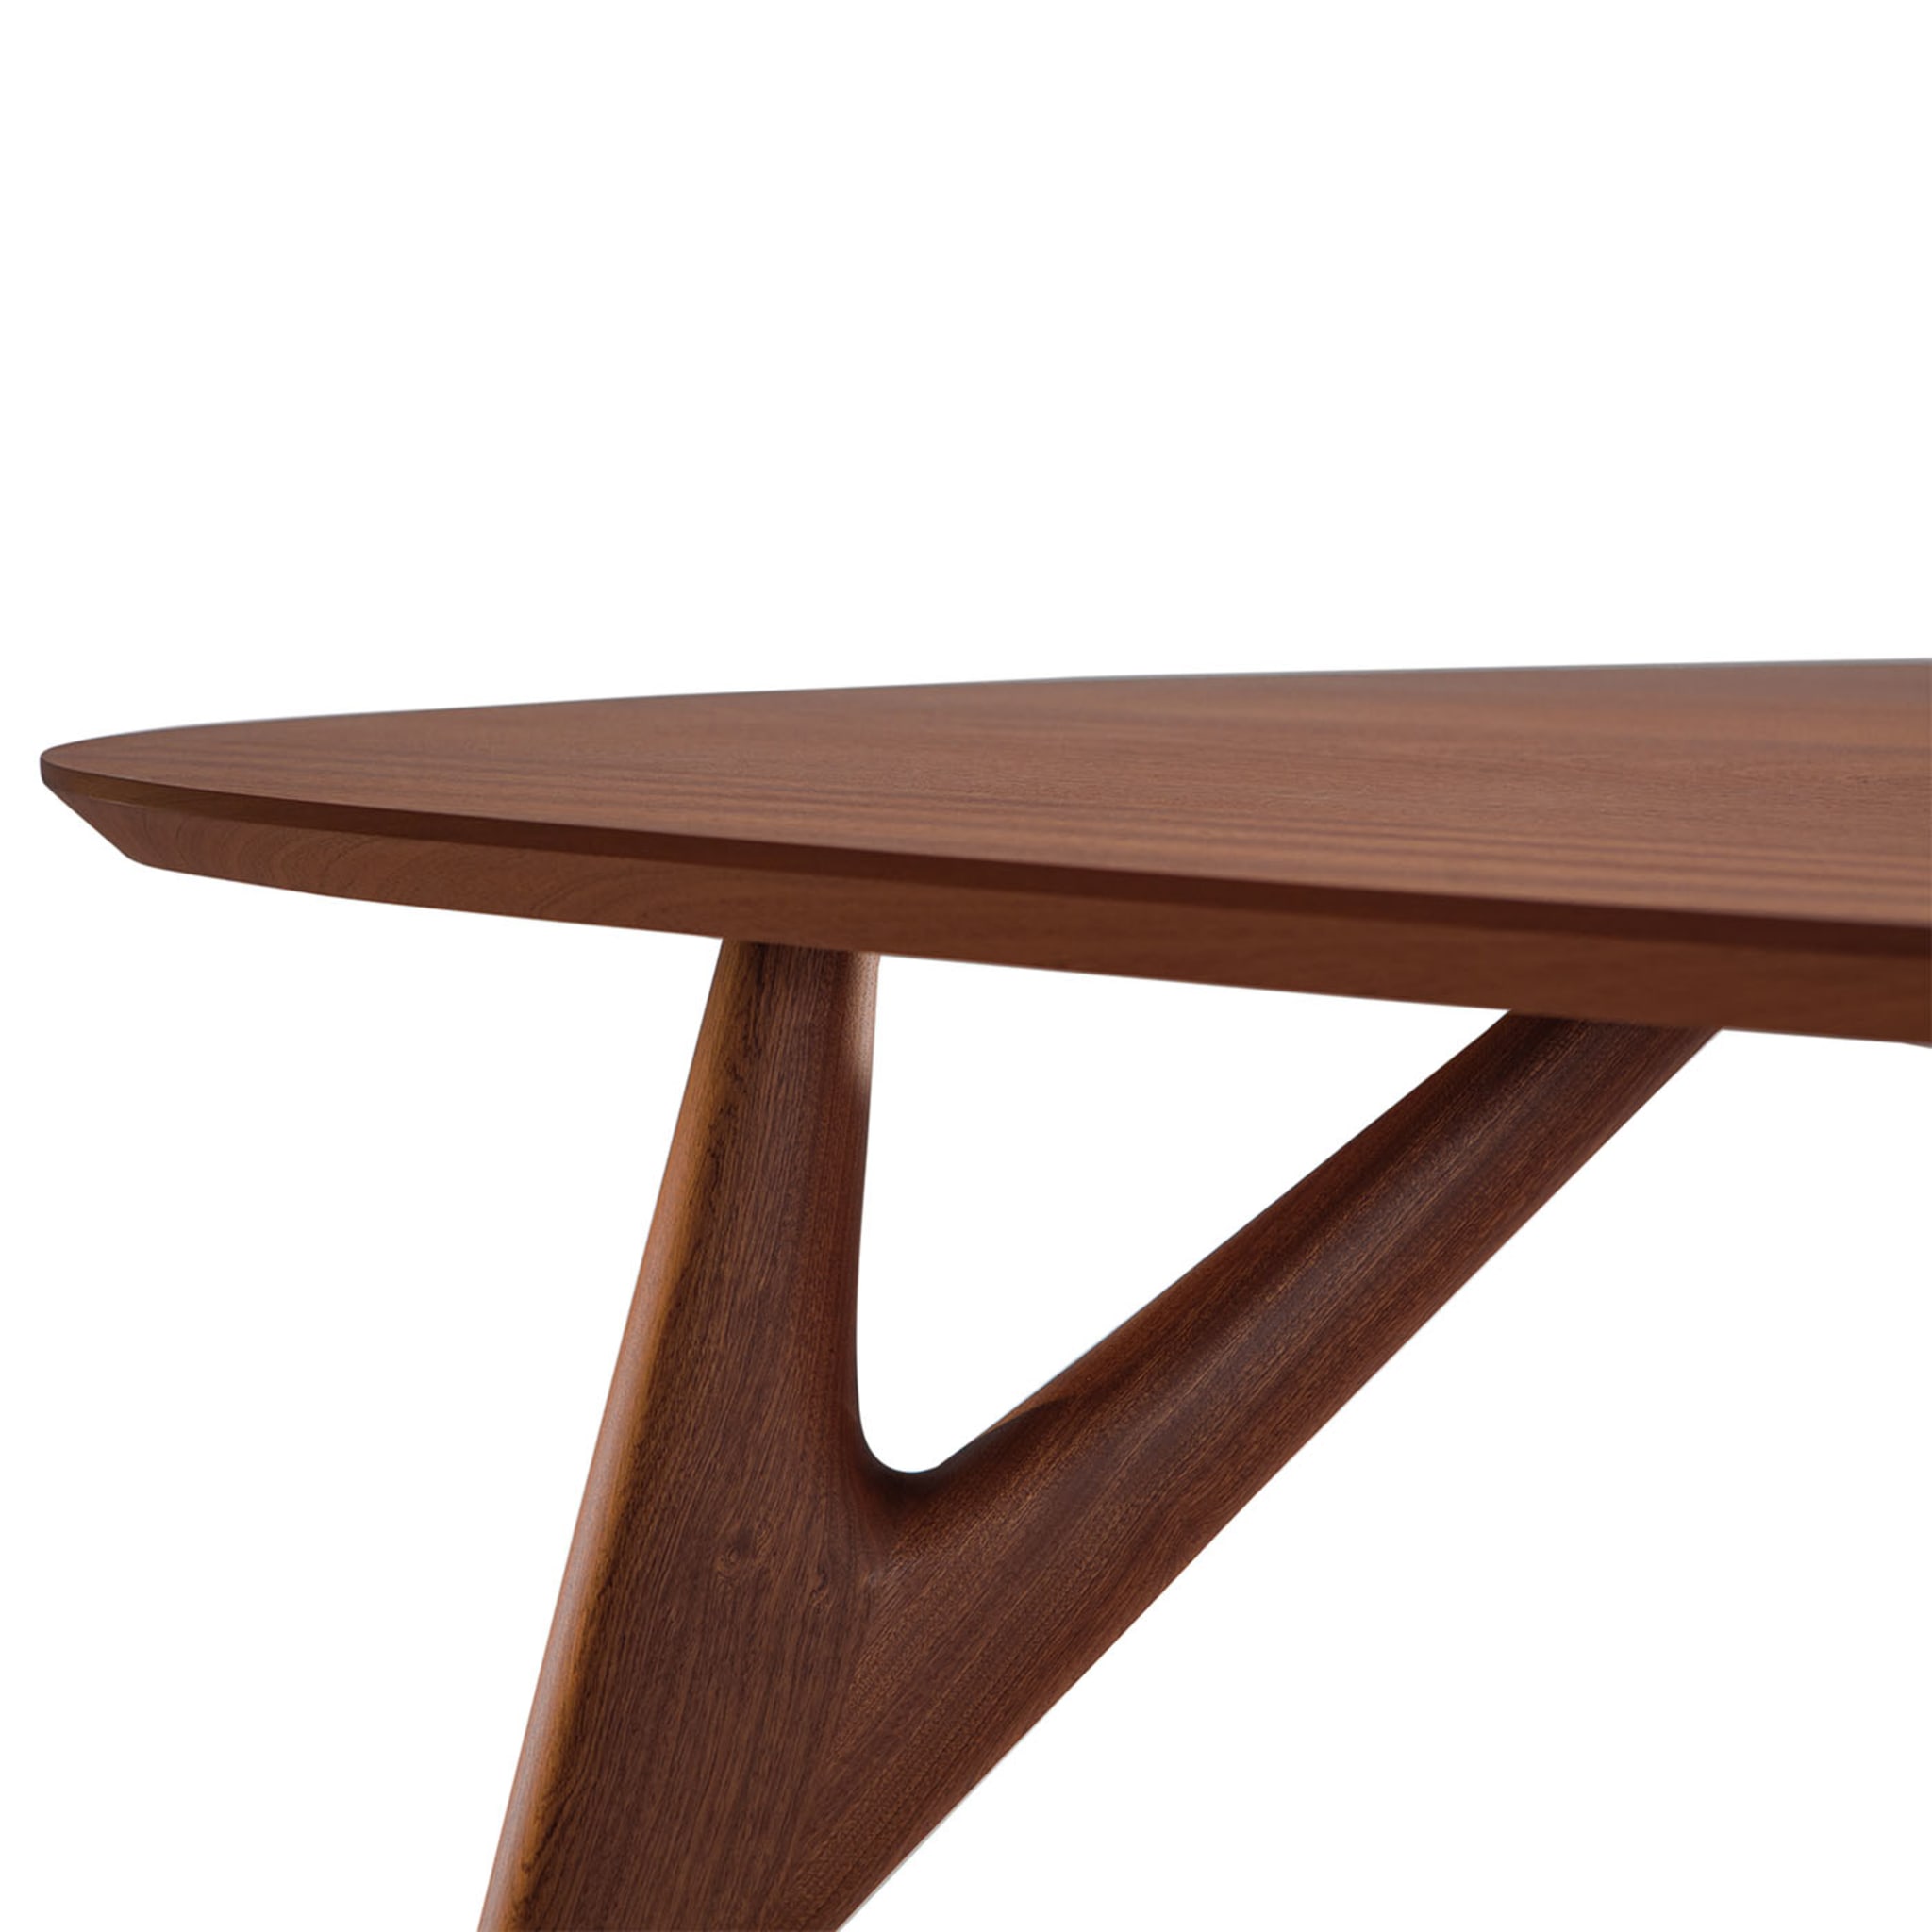 Ted Masterpiece Mahogany Large Table  - Alternative view 1